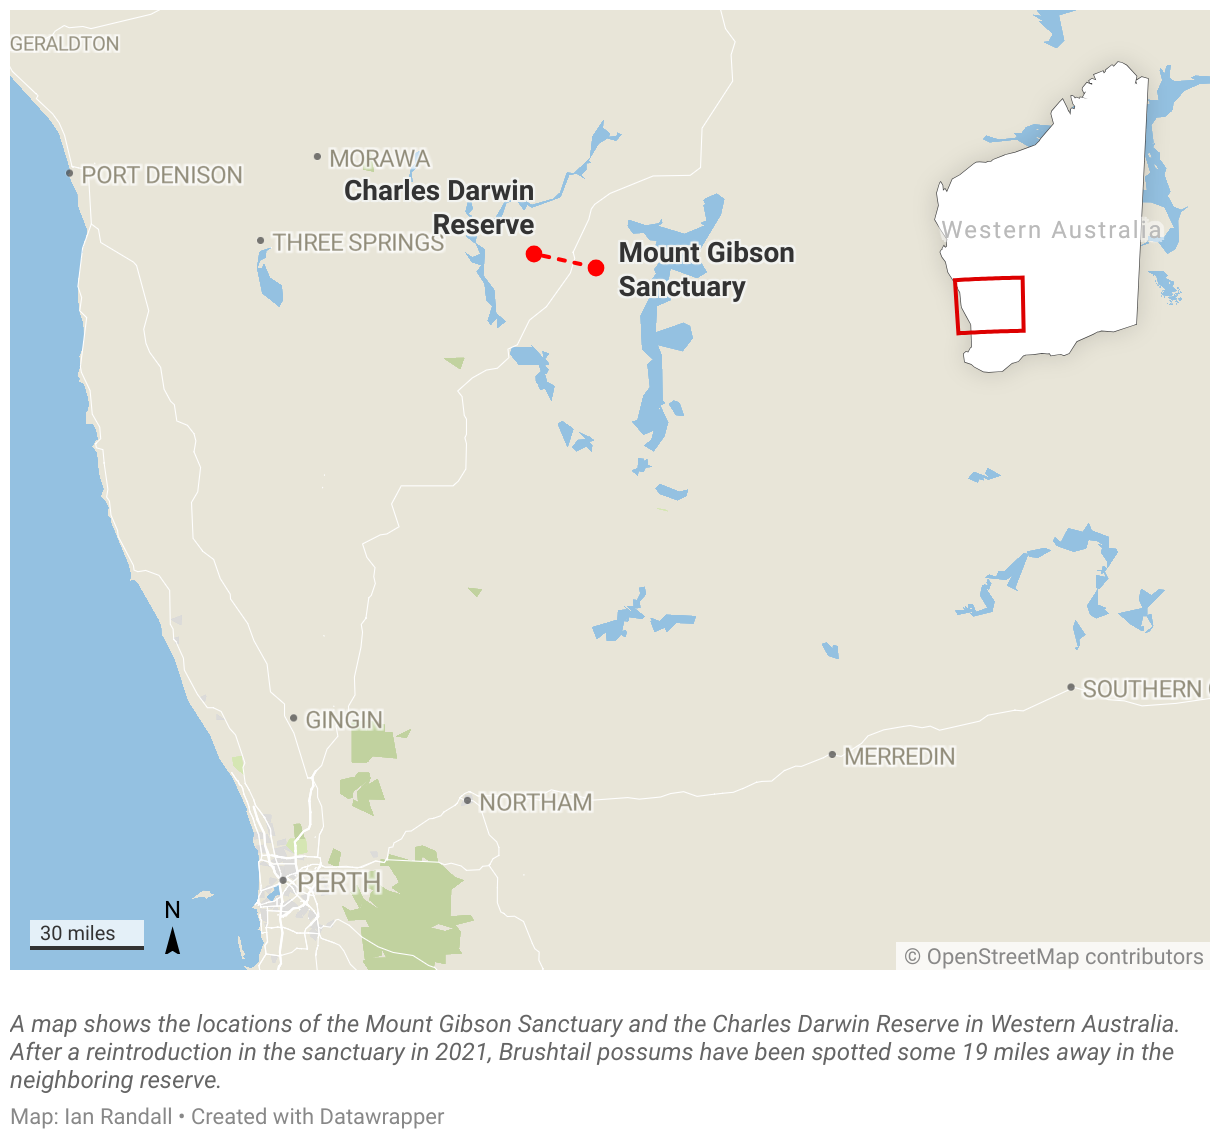 A map shows the locations of the Mount Gibson Sanctuary and the Charles Darwin Reserve in Western Australia. 